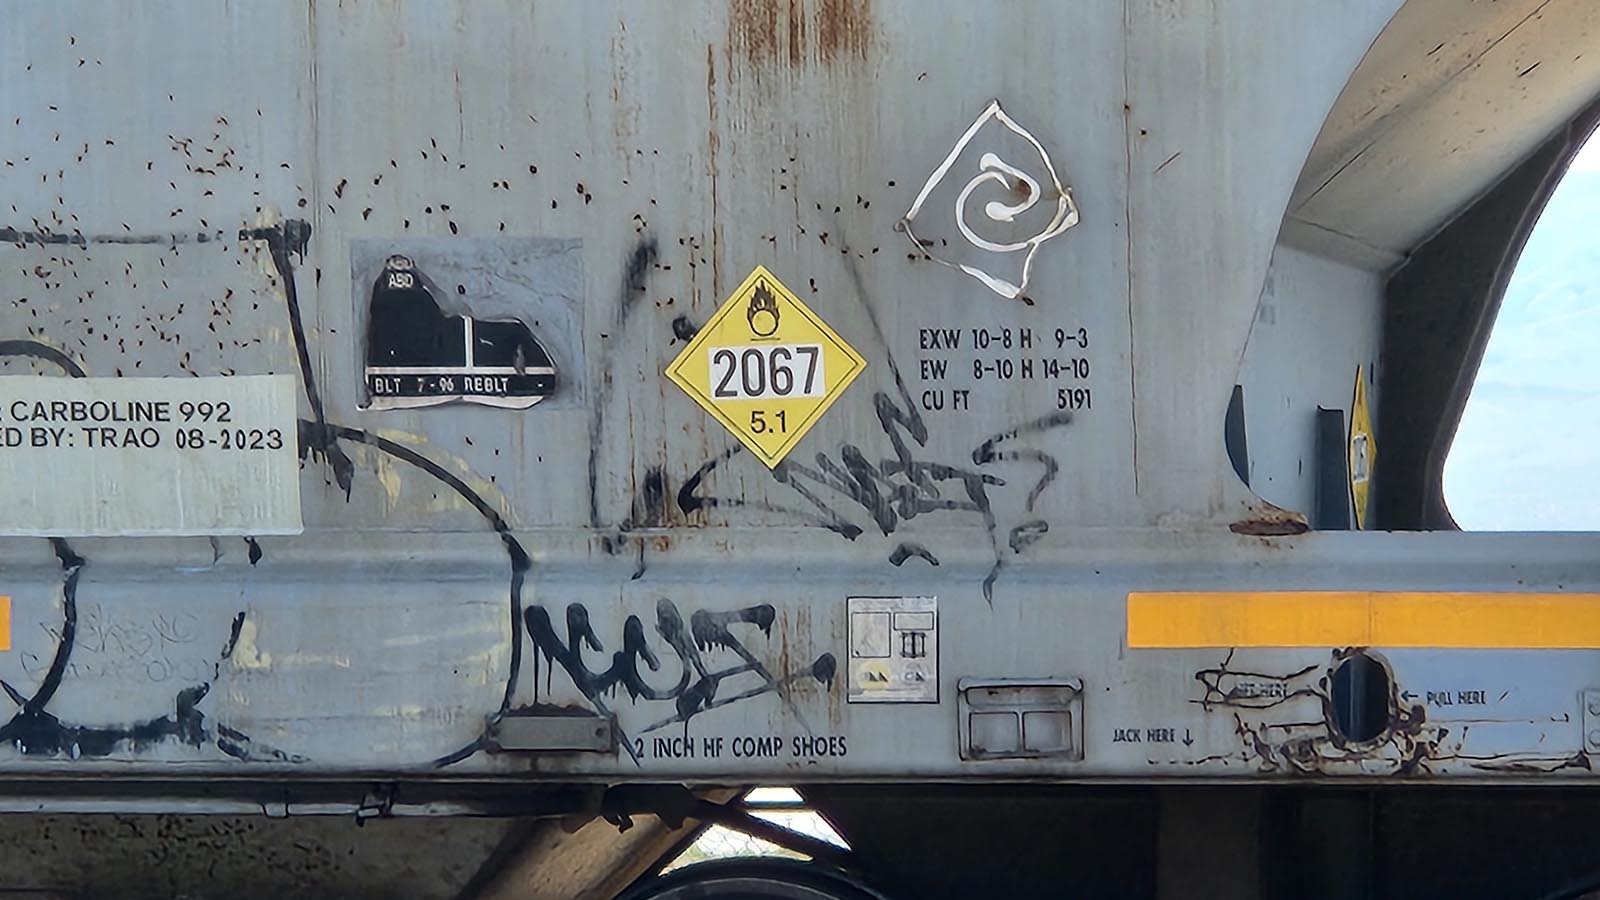 A label on the side of the hopper cars had the hazardous material placard of “UN 2067,” the identifier for ammonium nitrate. The hopper cars sitting in Saltdale on Monday indicated that they could each hold 5,191 cubic feet, or up to three times the 30 tons found missing last year.